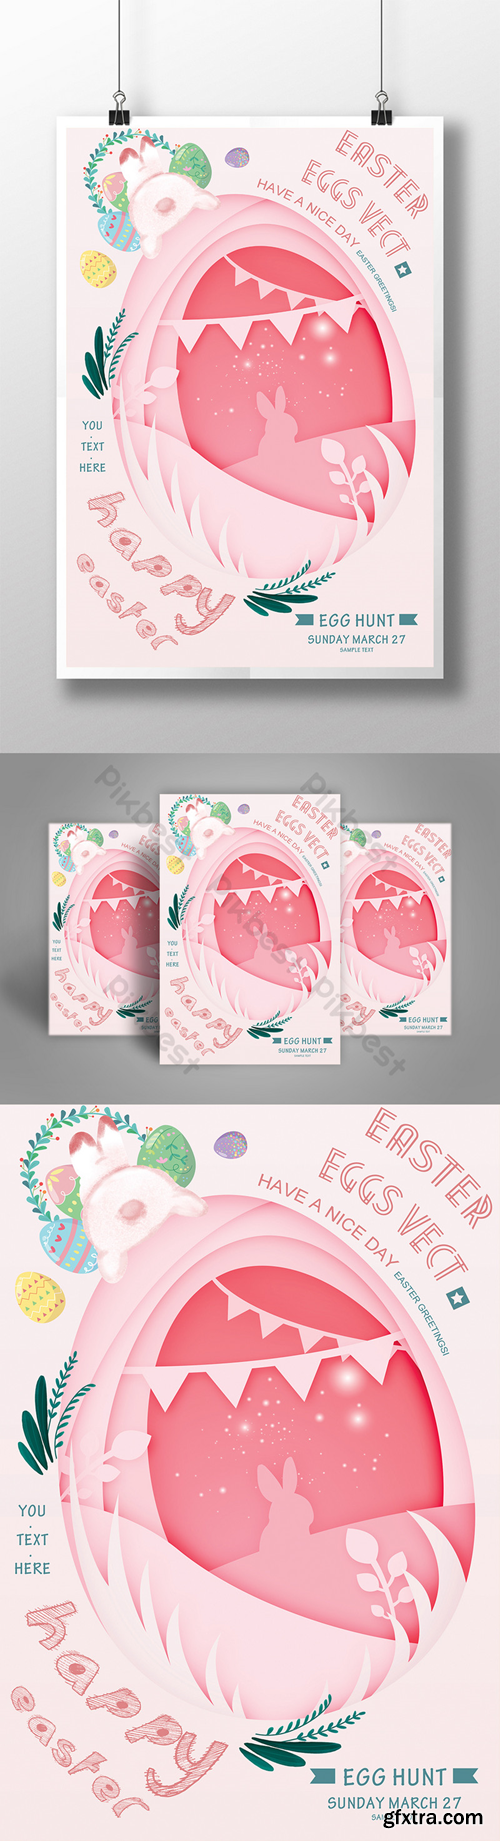 EASTER EGGS VECT Template PSD